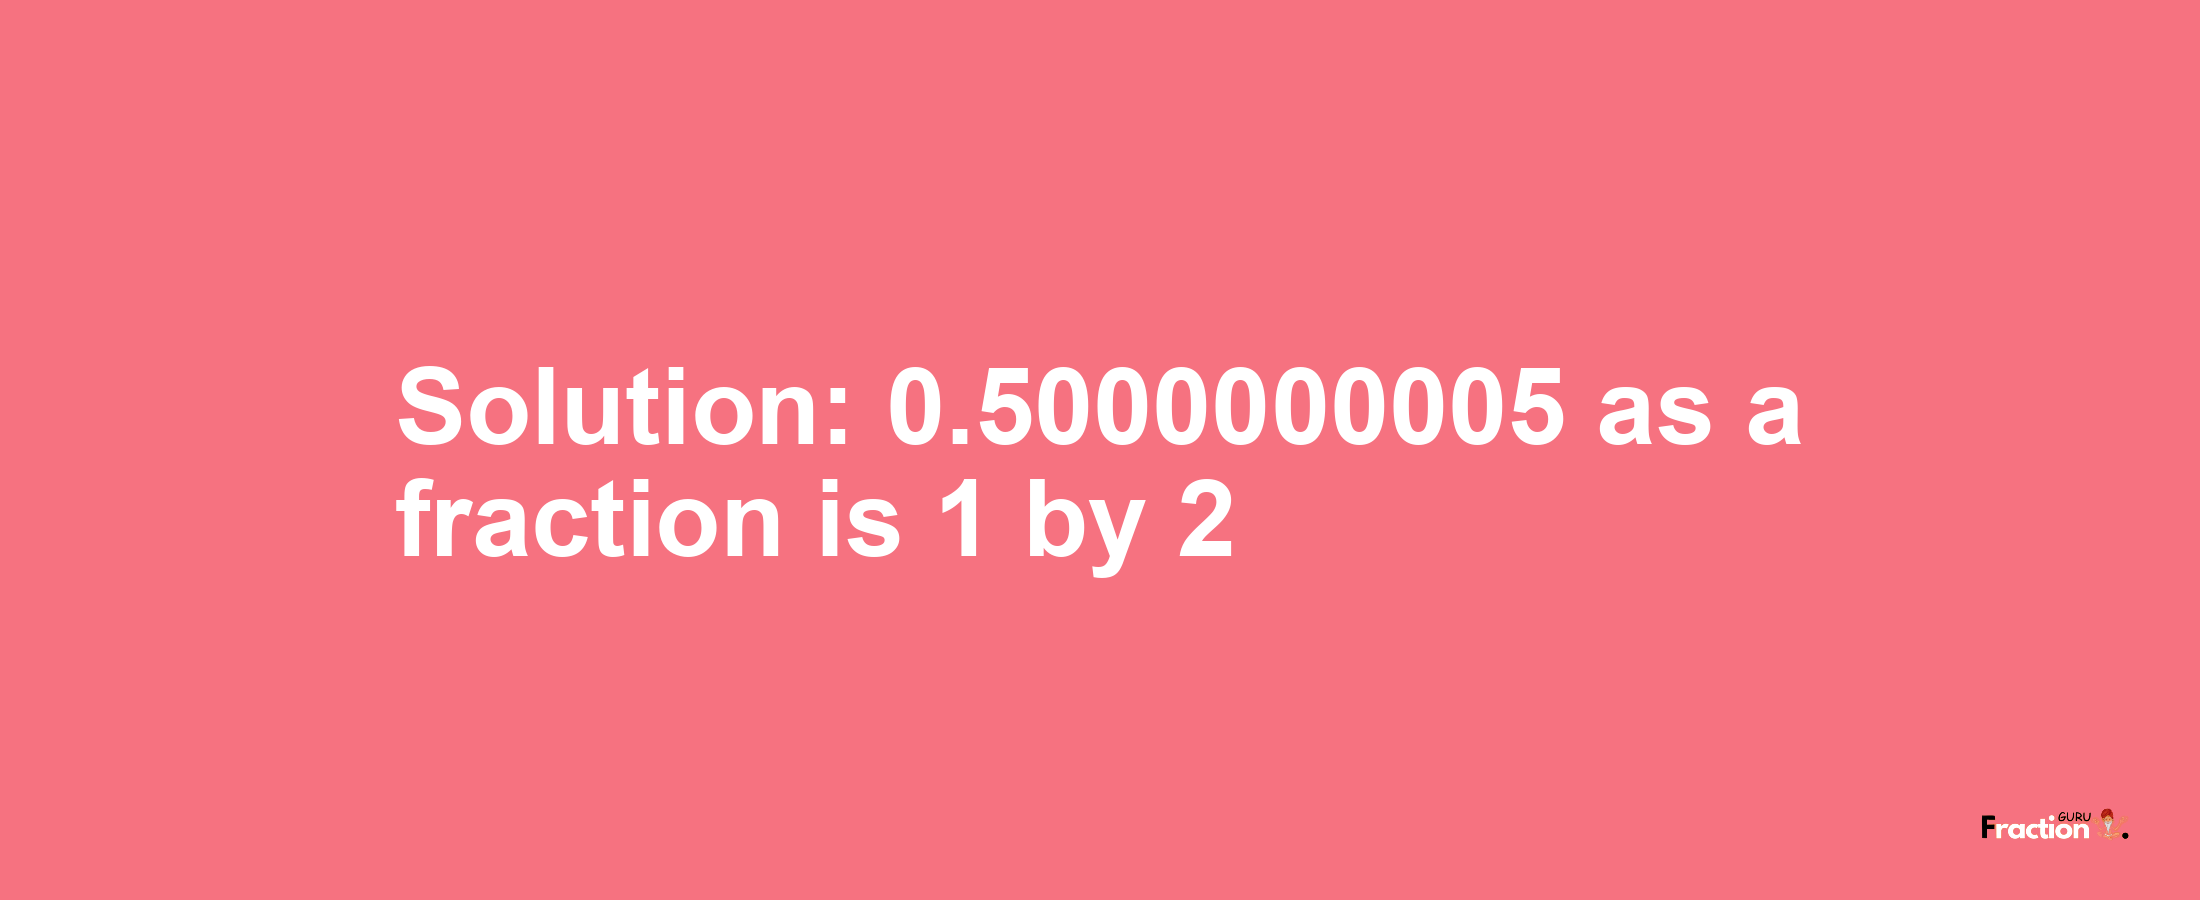 Solution:0.5000000005 as a fraction is 1/2